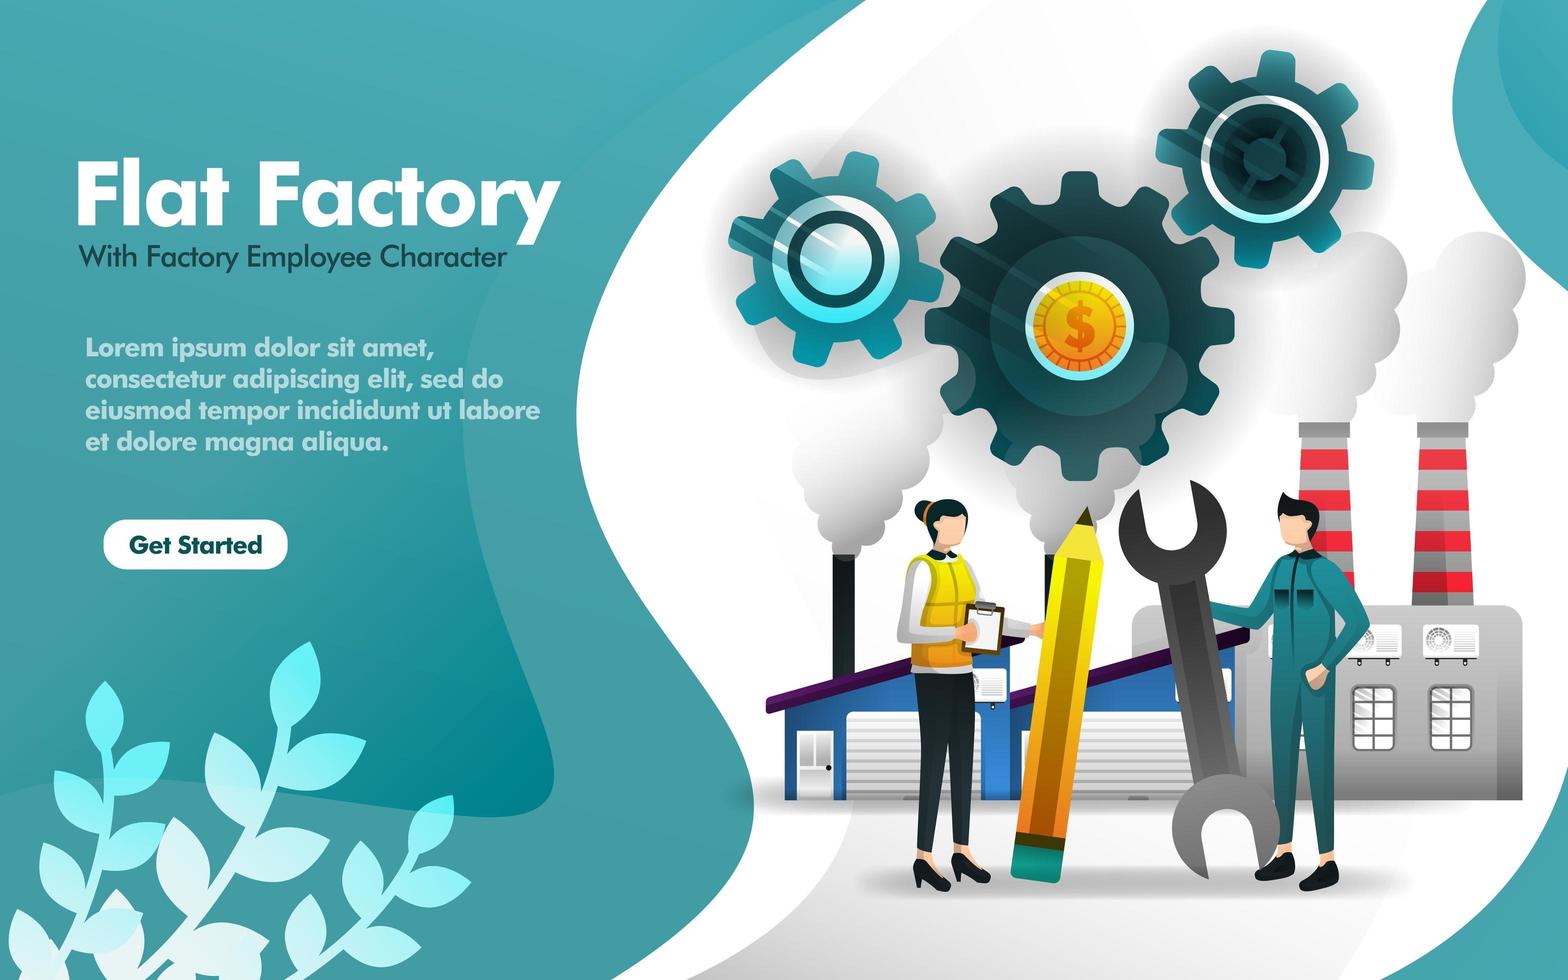 factory worker standing in front of the factory building in flat style. can use for, landing page, web, mobile app, poster, vector illustration, online promotion, internet marketing, finance, trading